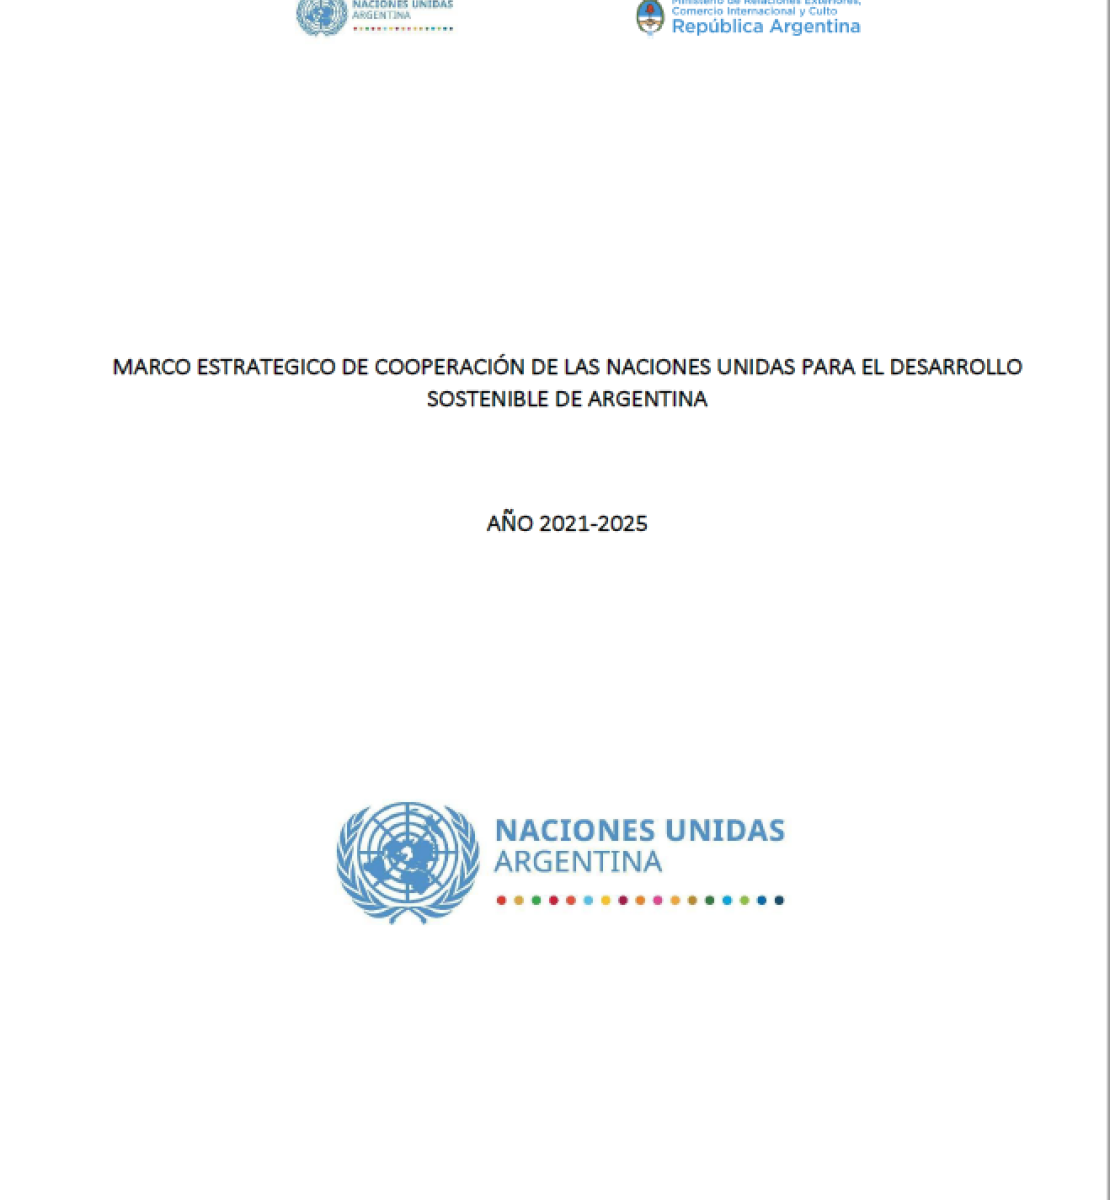 This is a white document with UN logo and the government of Argentina logos to the top.  